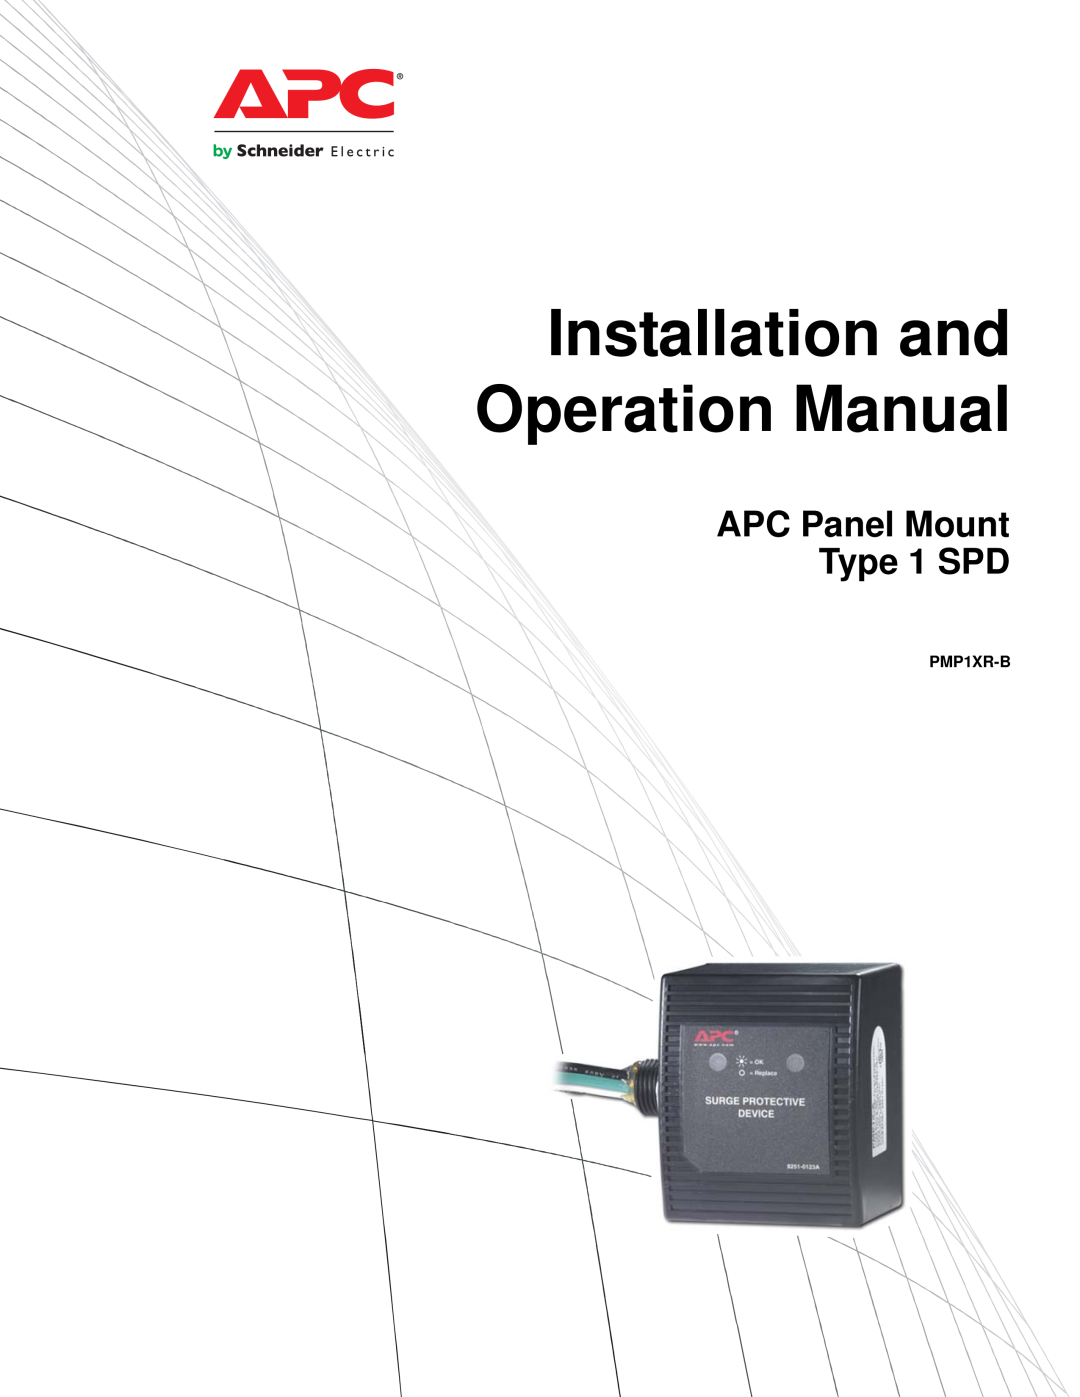 APC PMP1XR-B operation manual Installation and Operation Manual, APC Panel Mount Type 1 SPD 